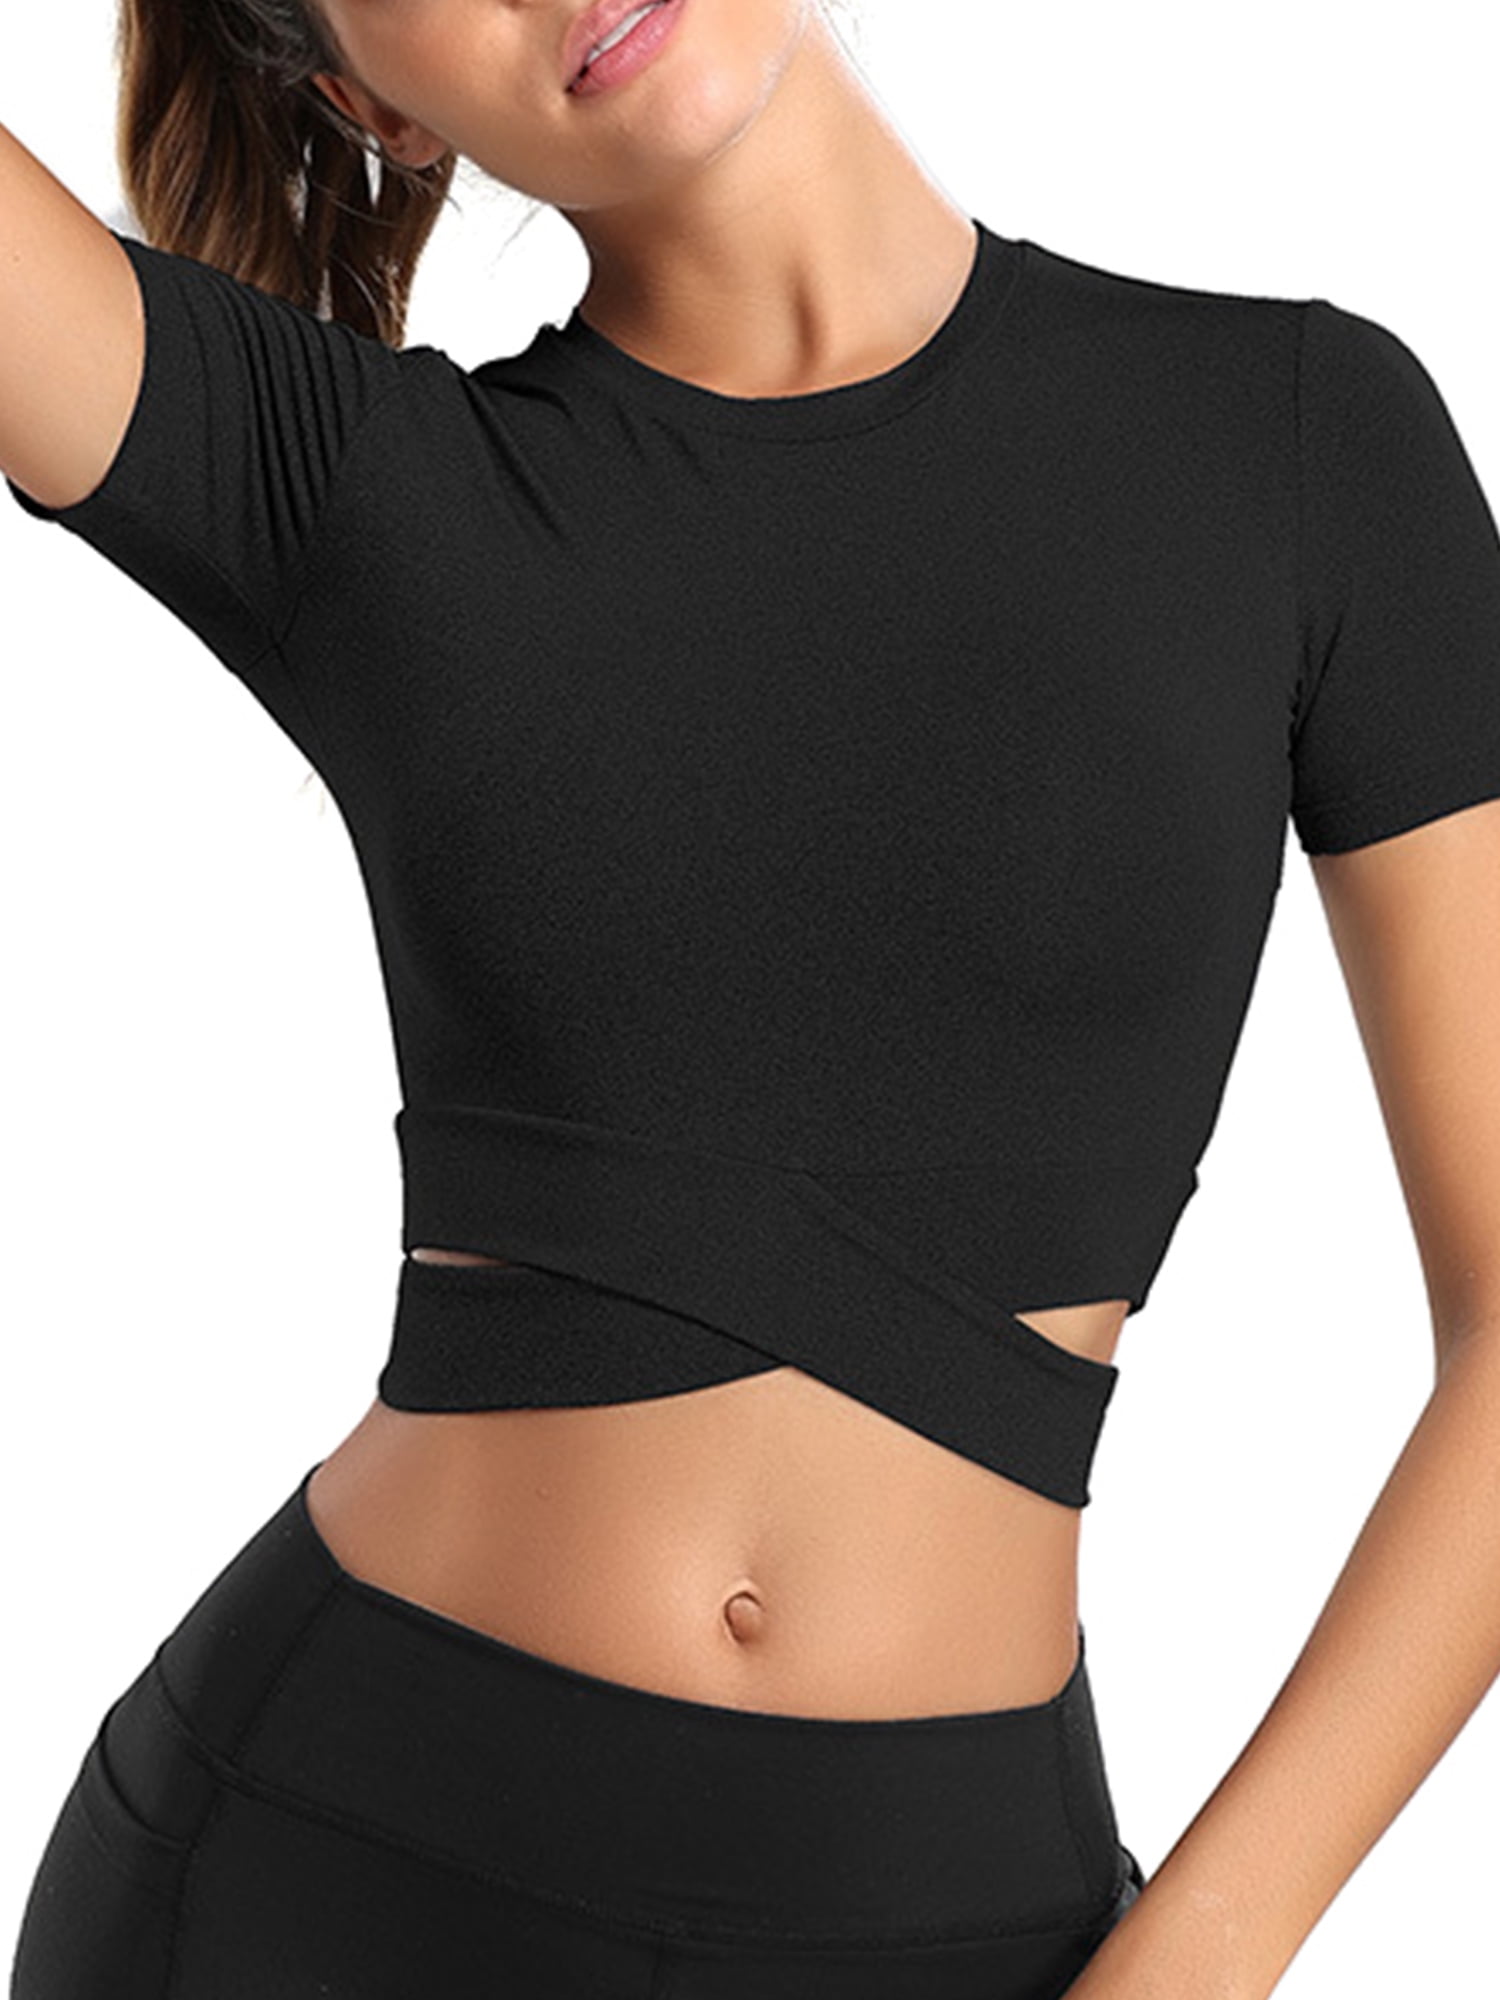  CRZ YOGA Butterluxe Short Sleeve Shirts for Women High Neck  Crop Tops Basic Fitted T-Shirt Gym Workout Top Black XX-Small : Clothing,  Shoes & Jewelry